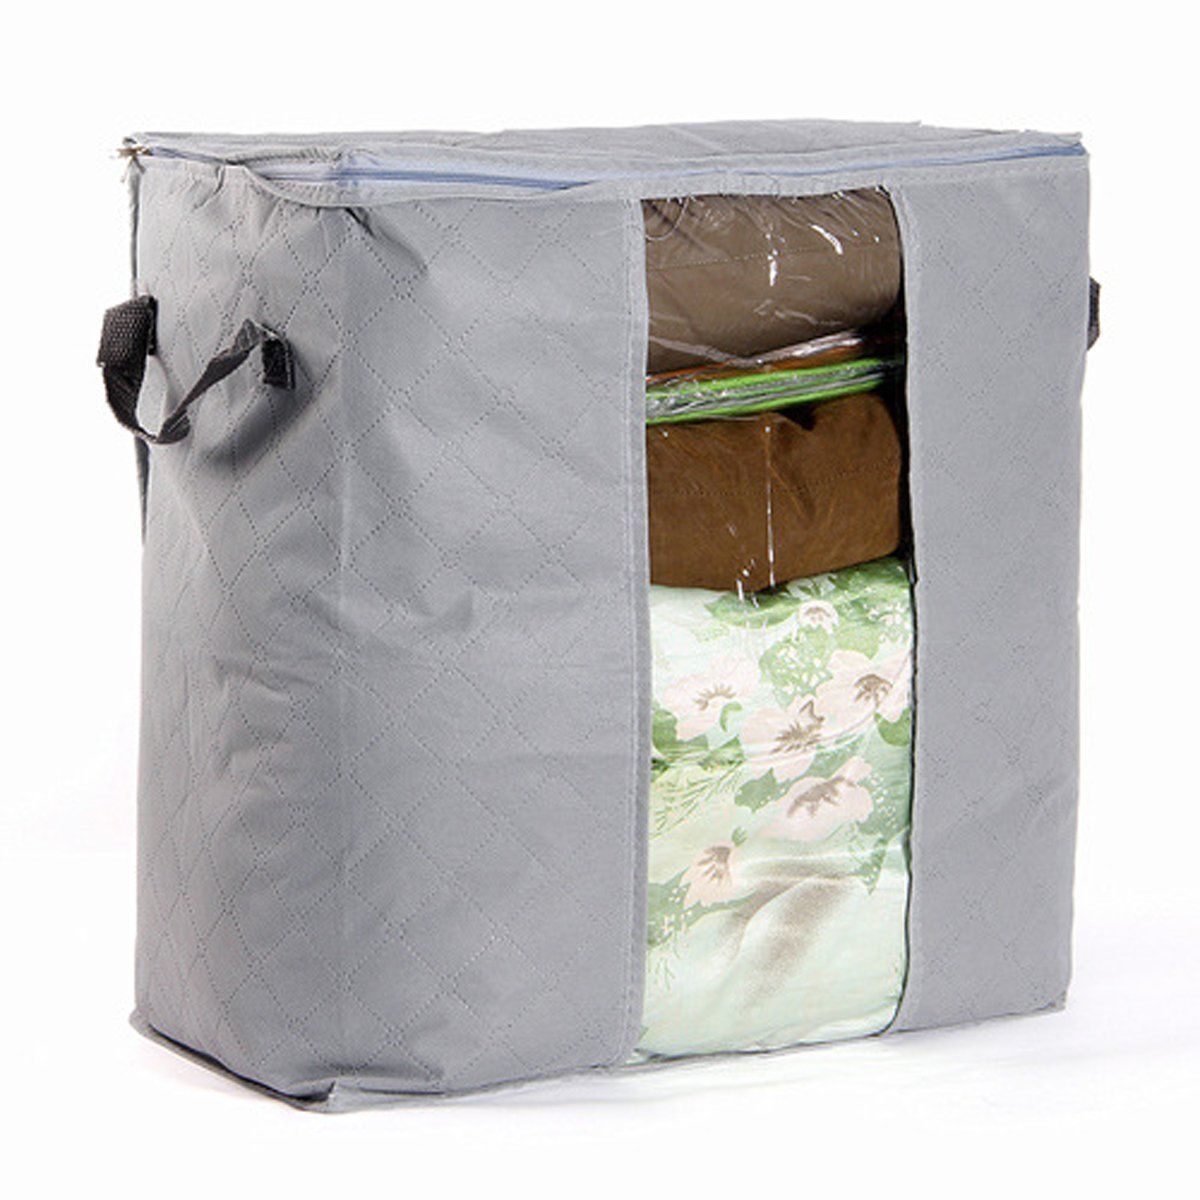 Home Organizer Under Bed Storage Bag Container For Clothes Garments Blanket